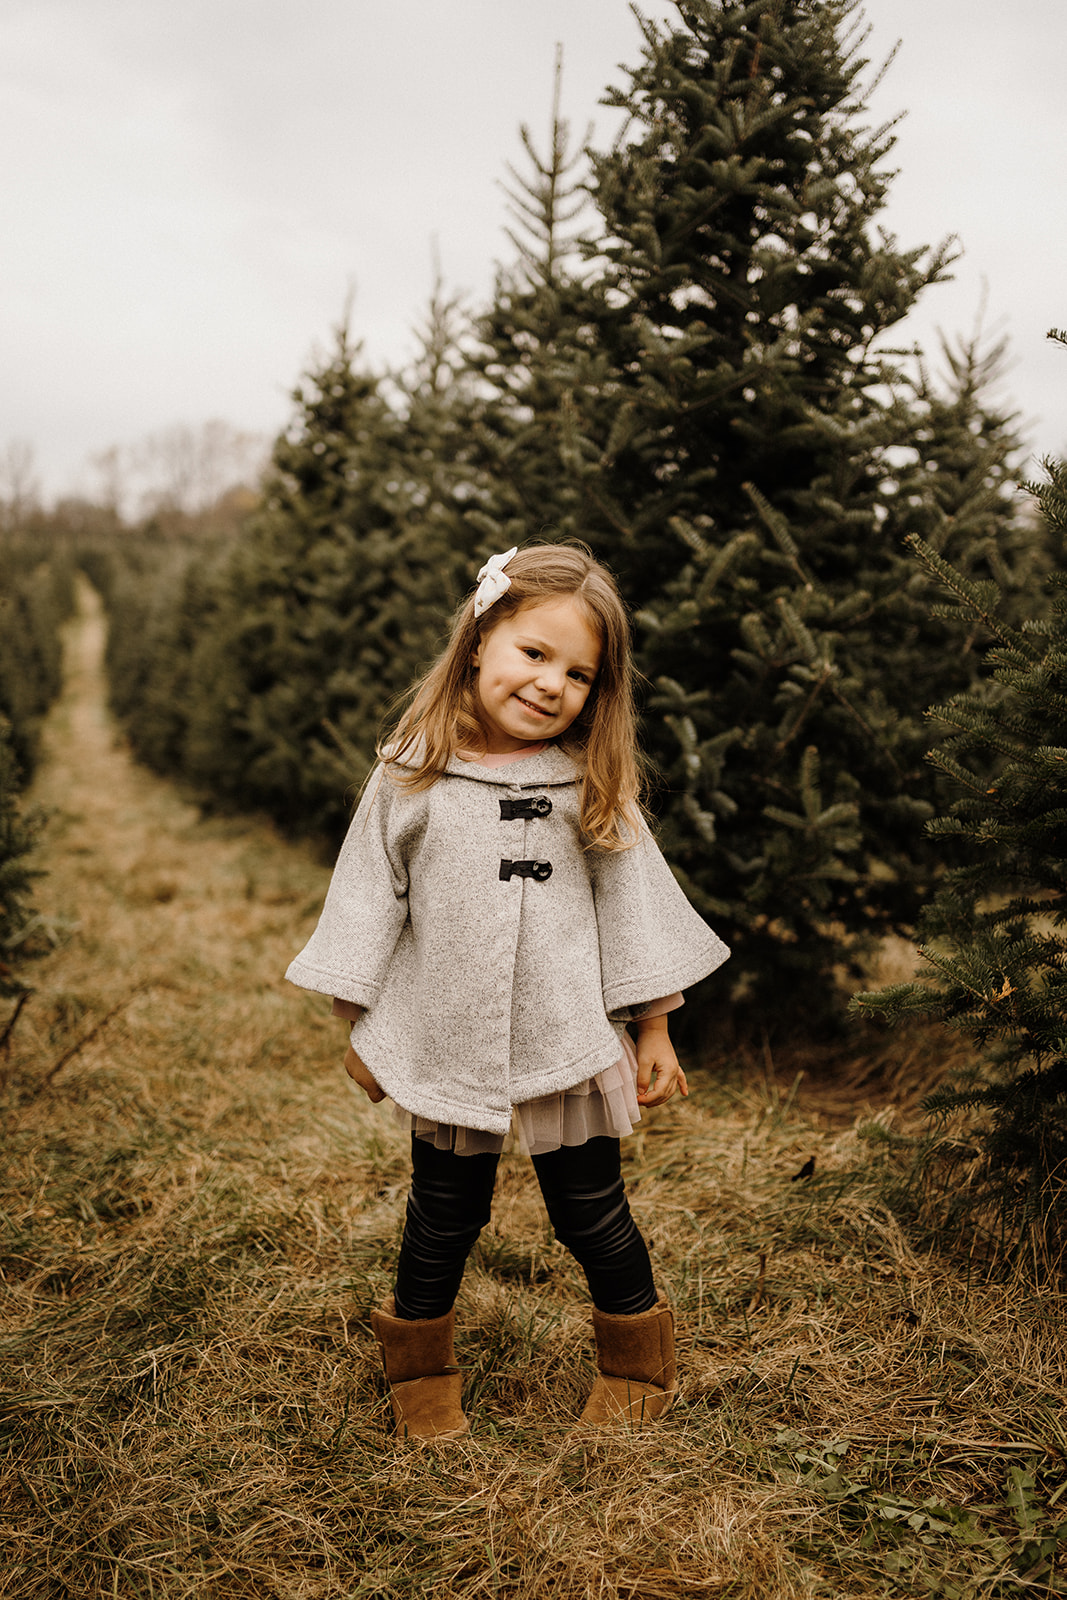 A little girl standing in front of Christmas Trees.